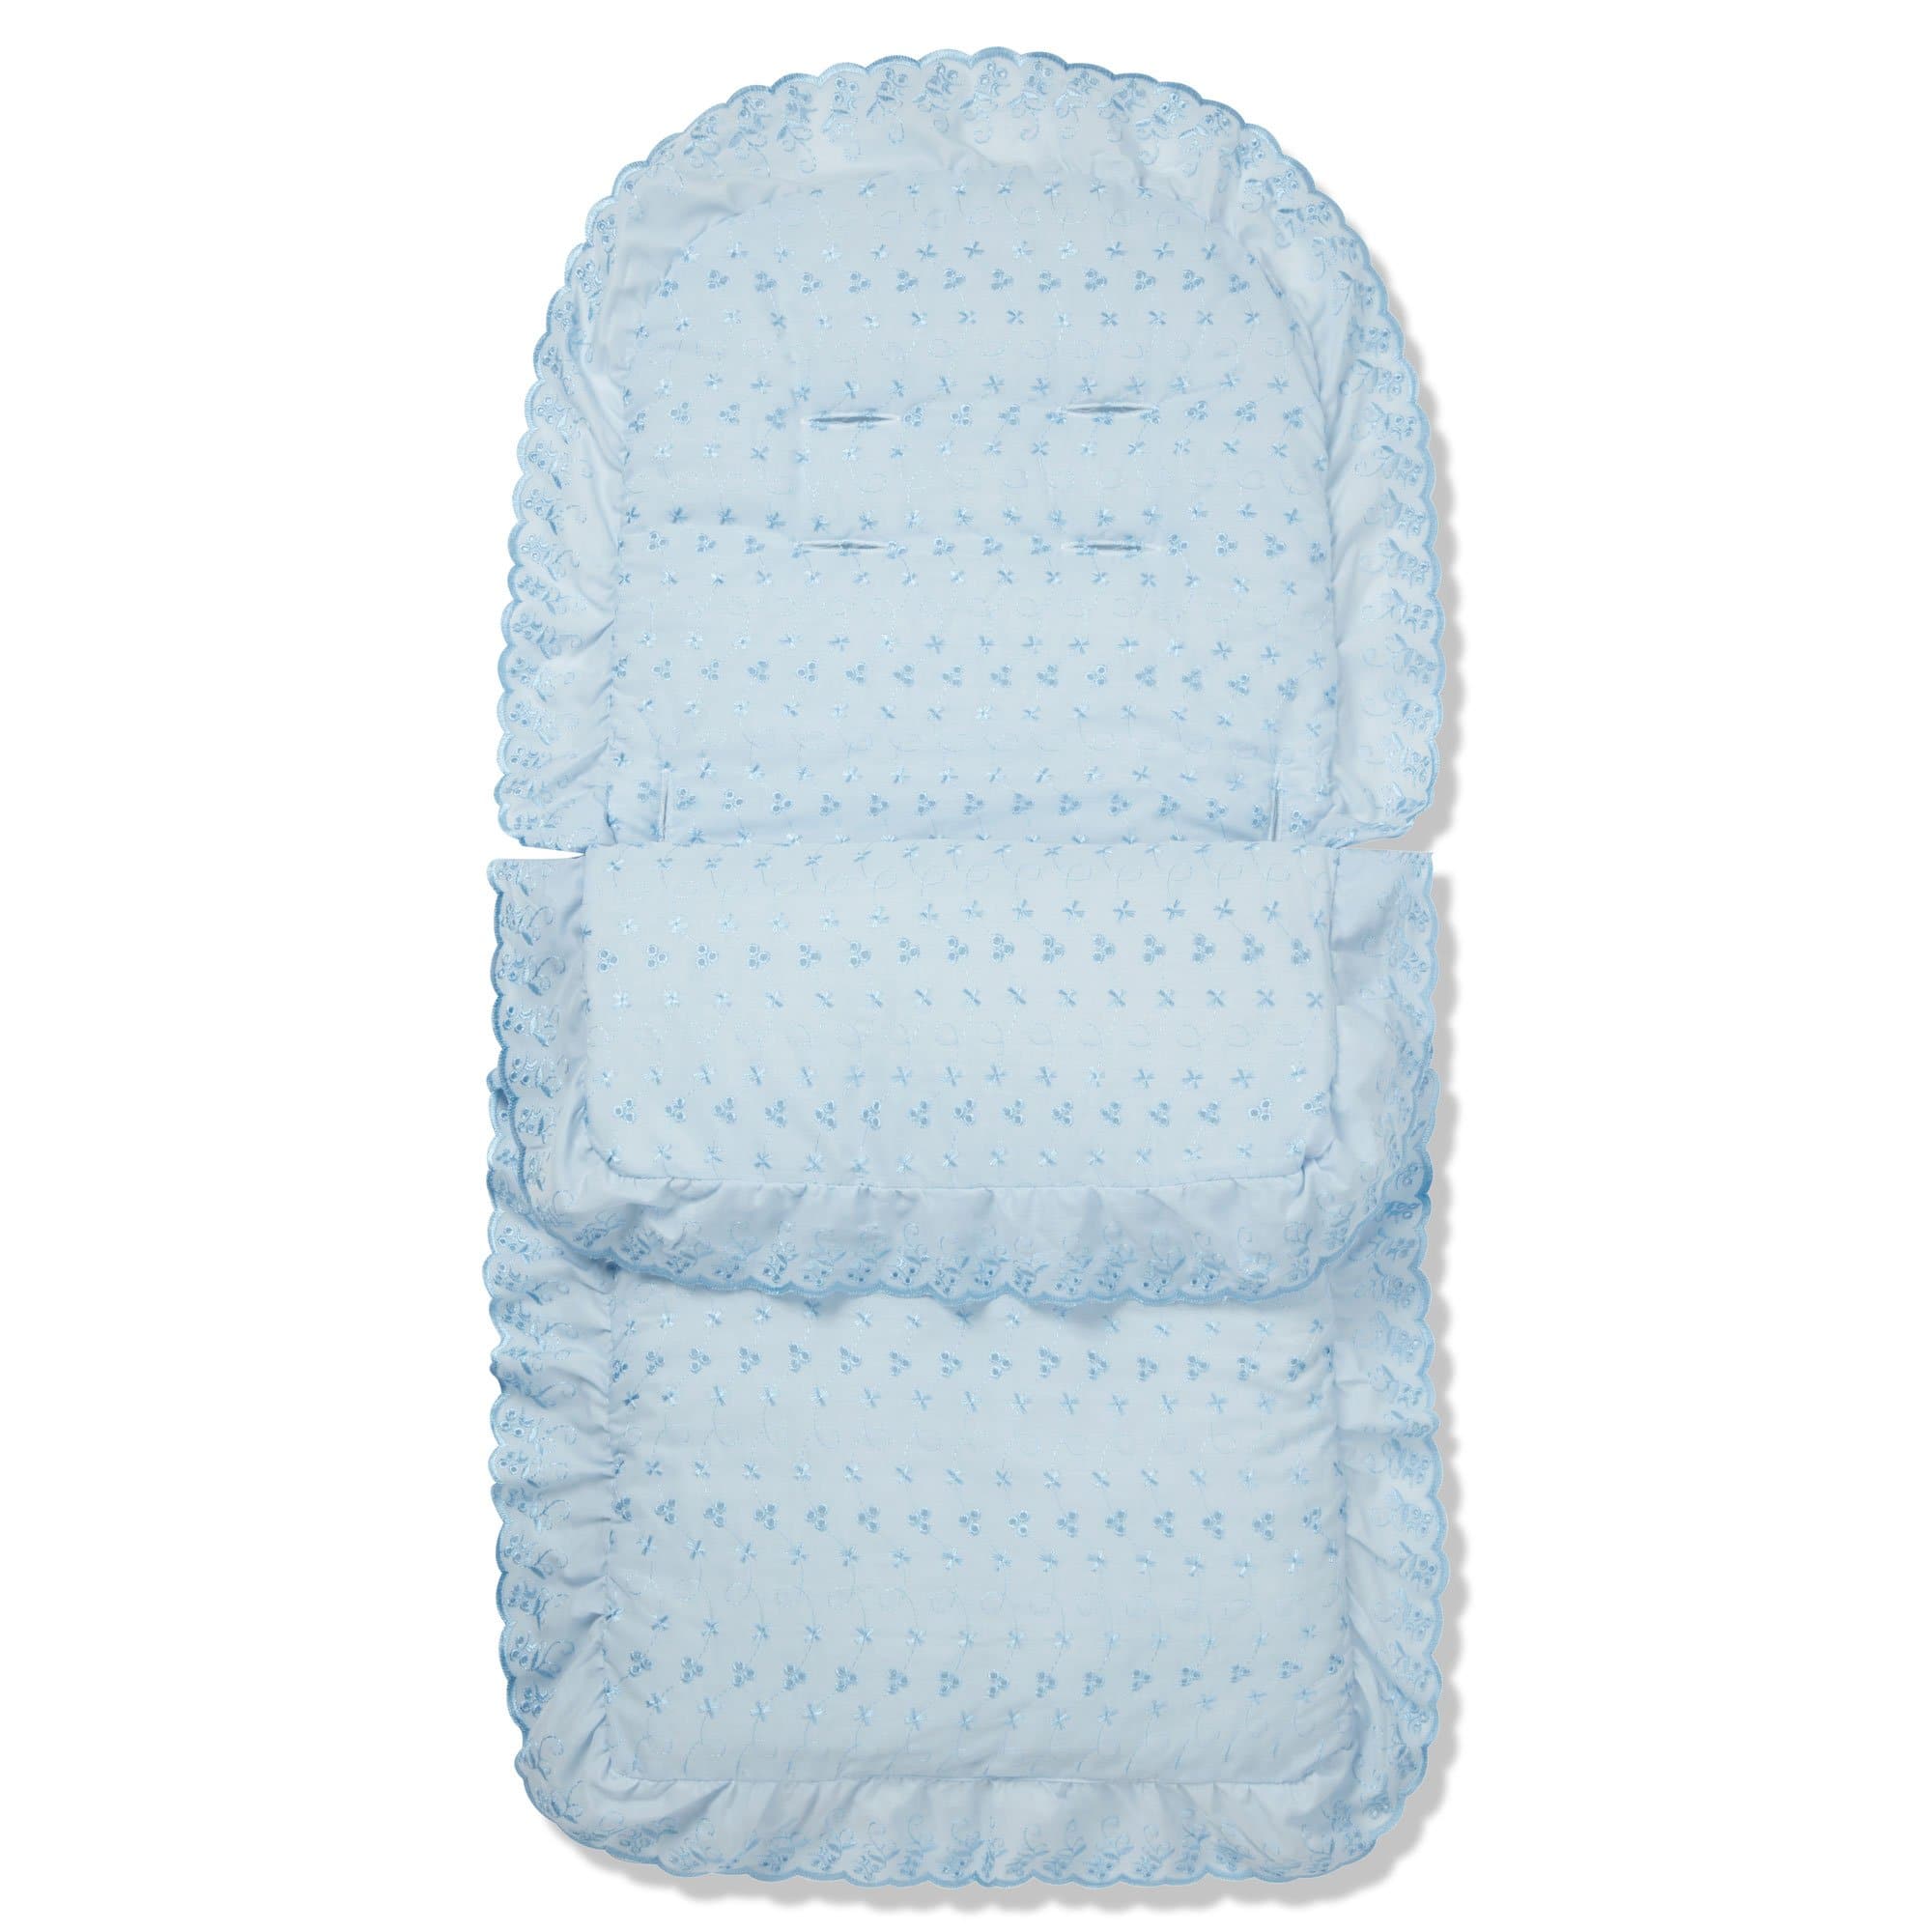 Broderie Anglaise Footmuff / Cosy Toes Compatible with Brevi - For Your Little One